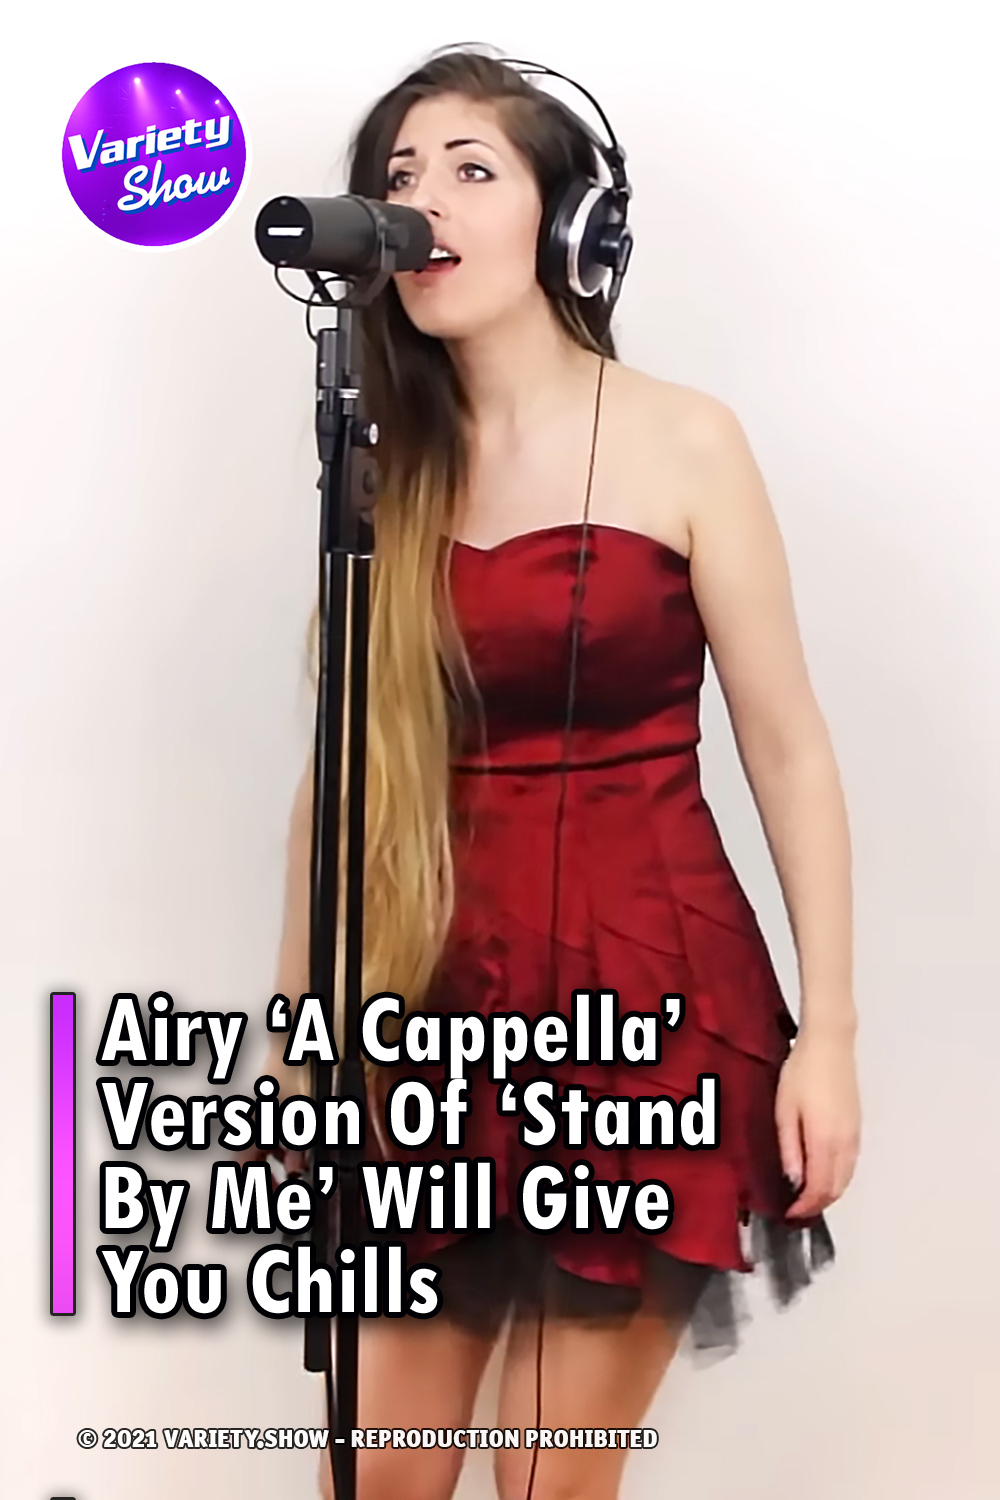 Airy ‘A Cappella’ Version Of ‘Stand By Me’ Will Give You Chills